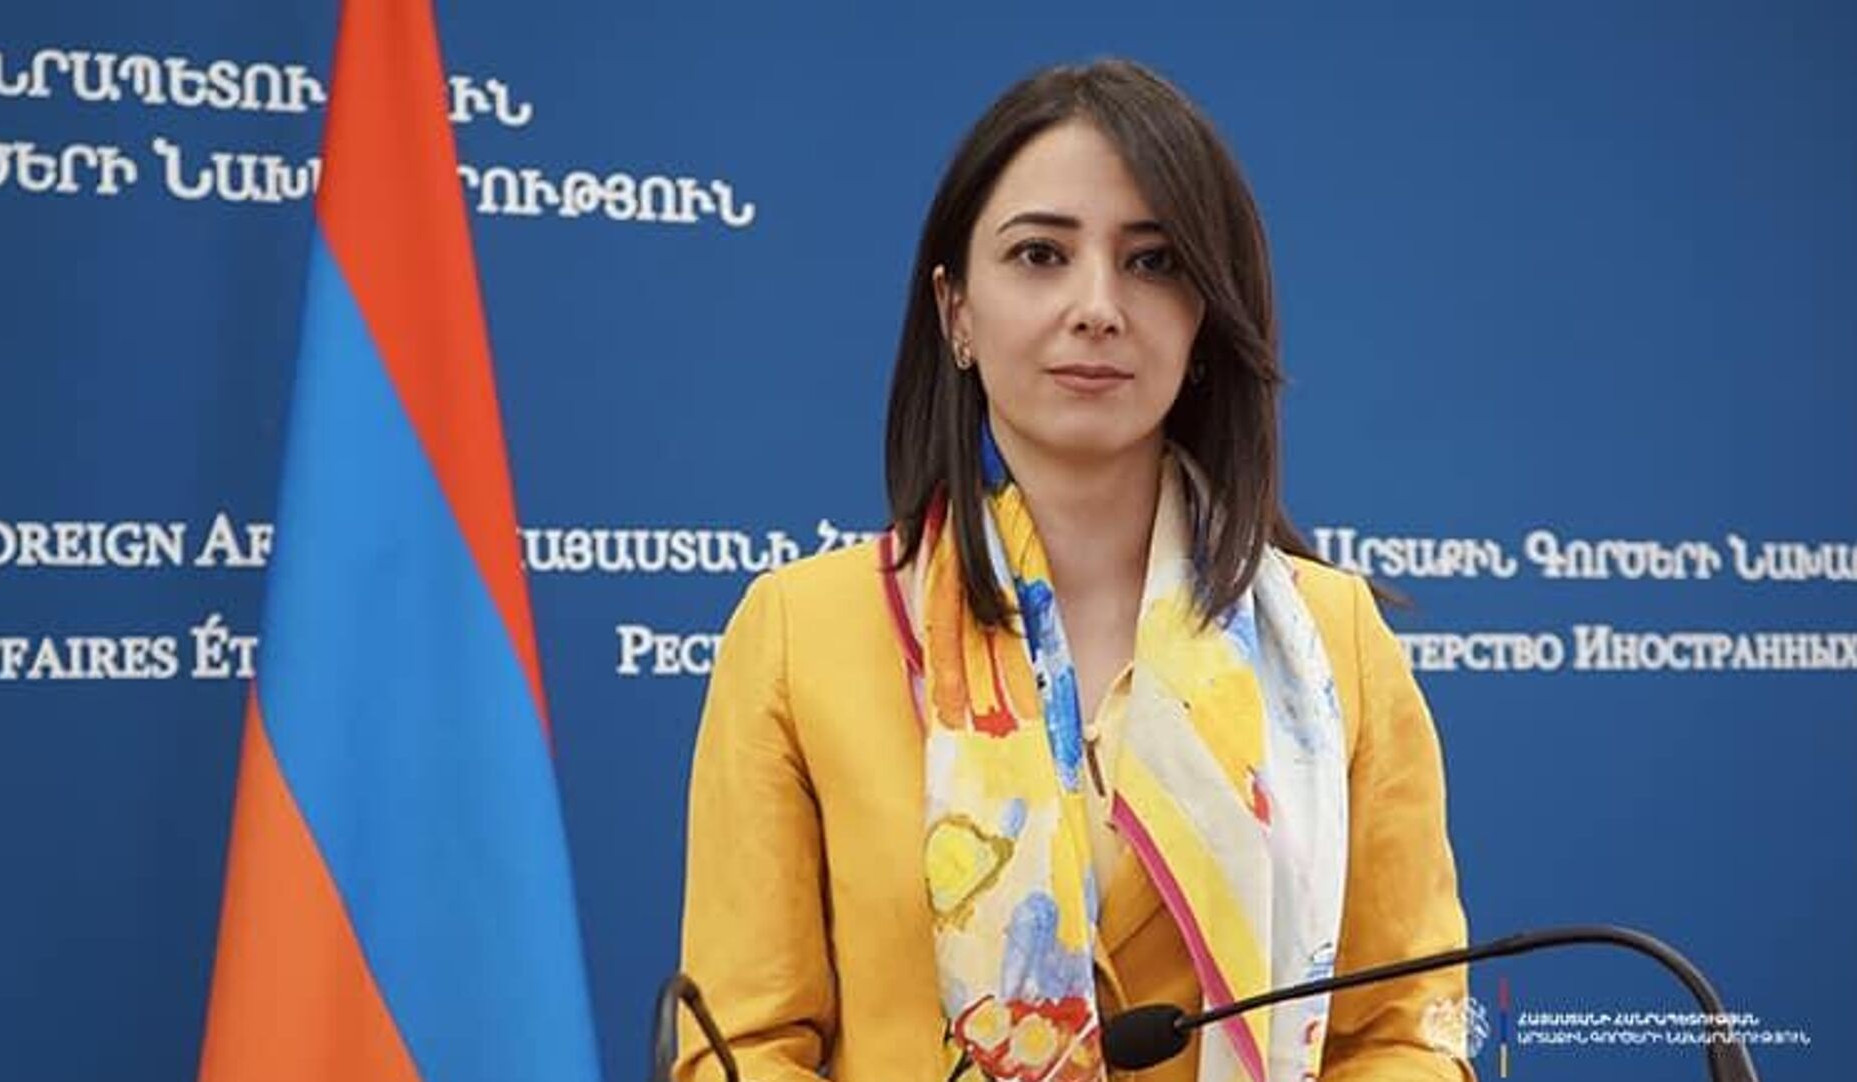 Objective media coverage of Azerbaijan's military attack against Nagorno-Karabakh and ethnic cleansing is vital: Armenia's Foreign Ministry Spokesperson